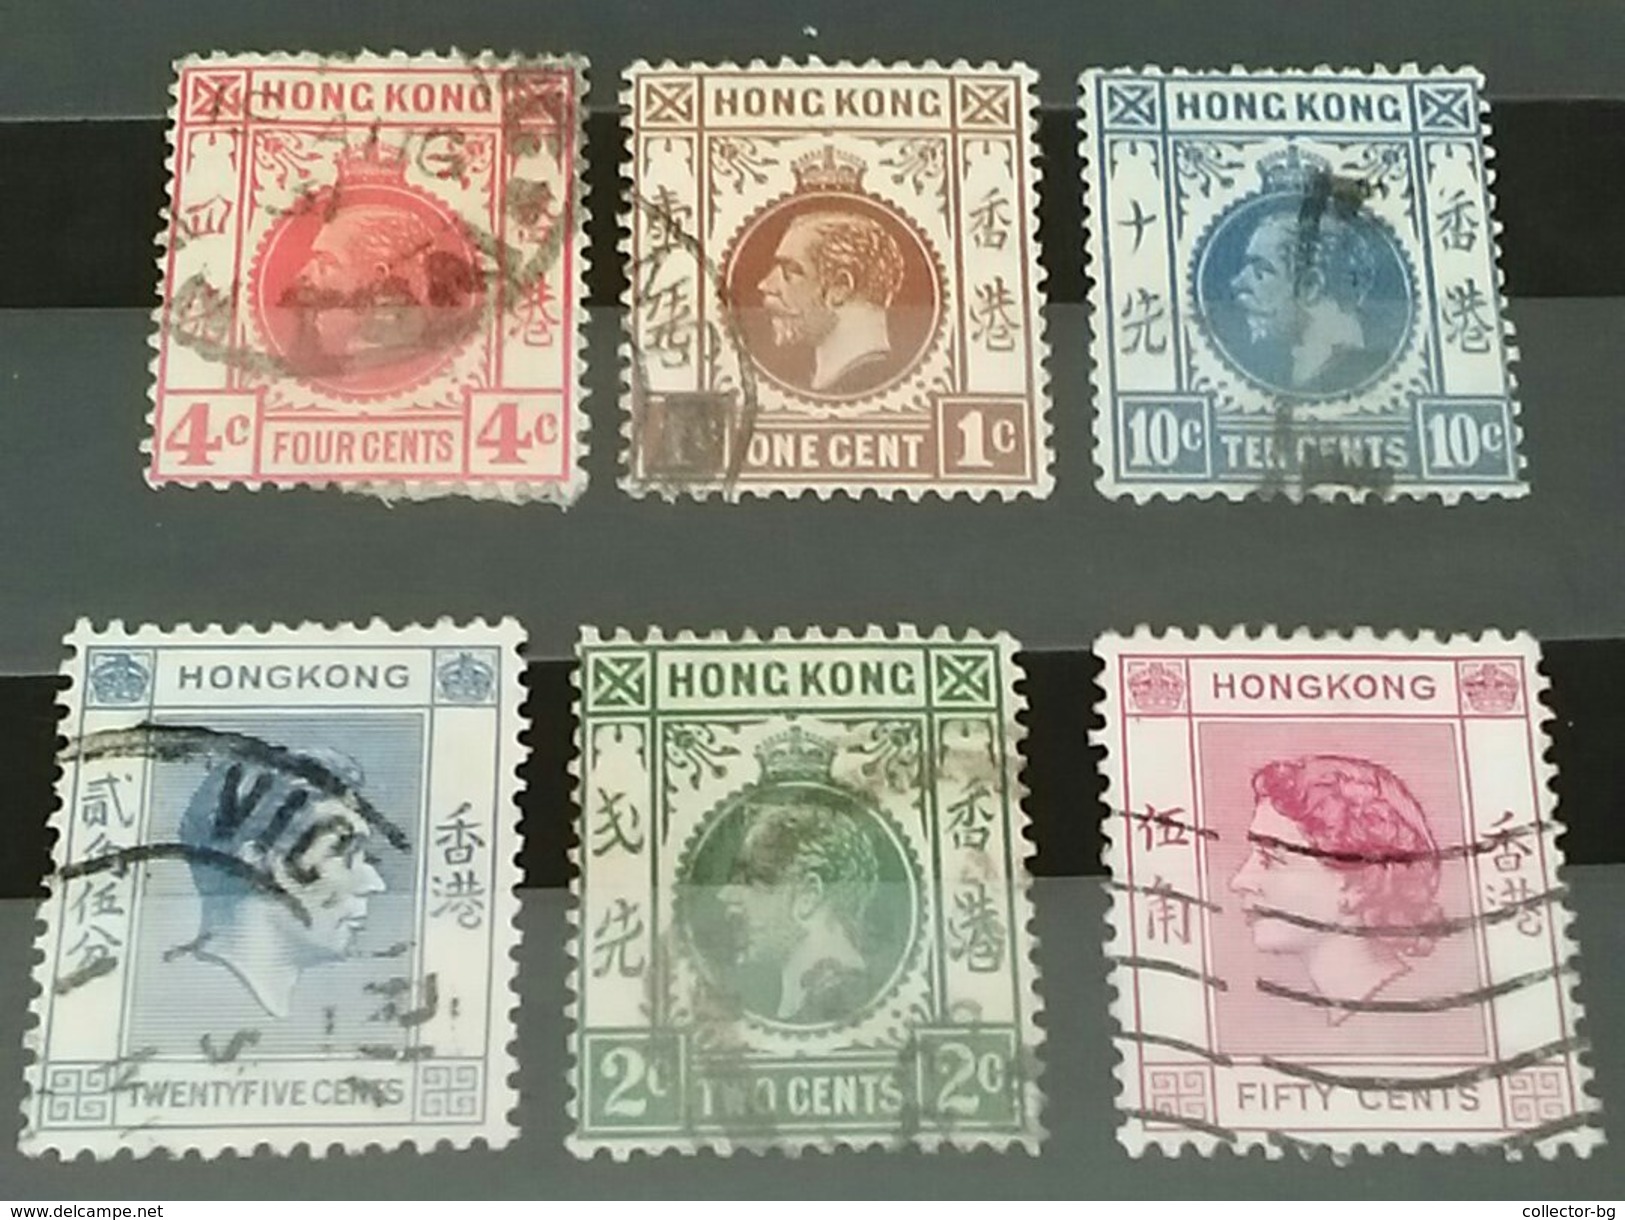 RARE SET LOT HONG KONG 1C+2C+4C+10C+25C+50C CENTS KING GEORGE V STAMP TIMBRE - Used Stamps